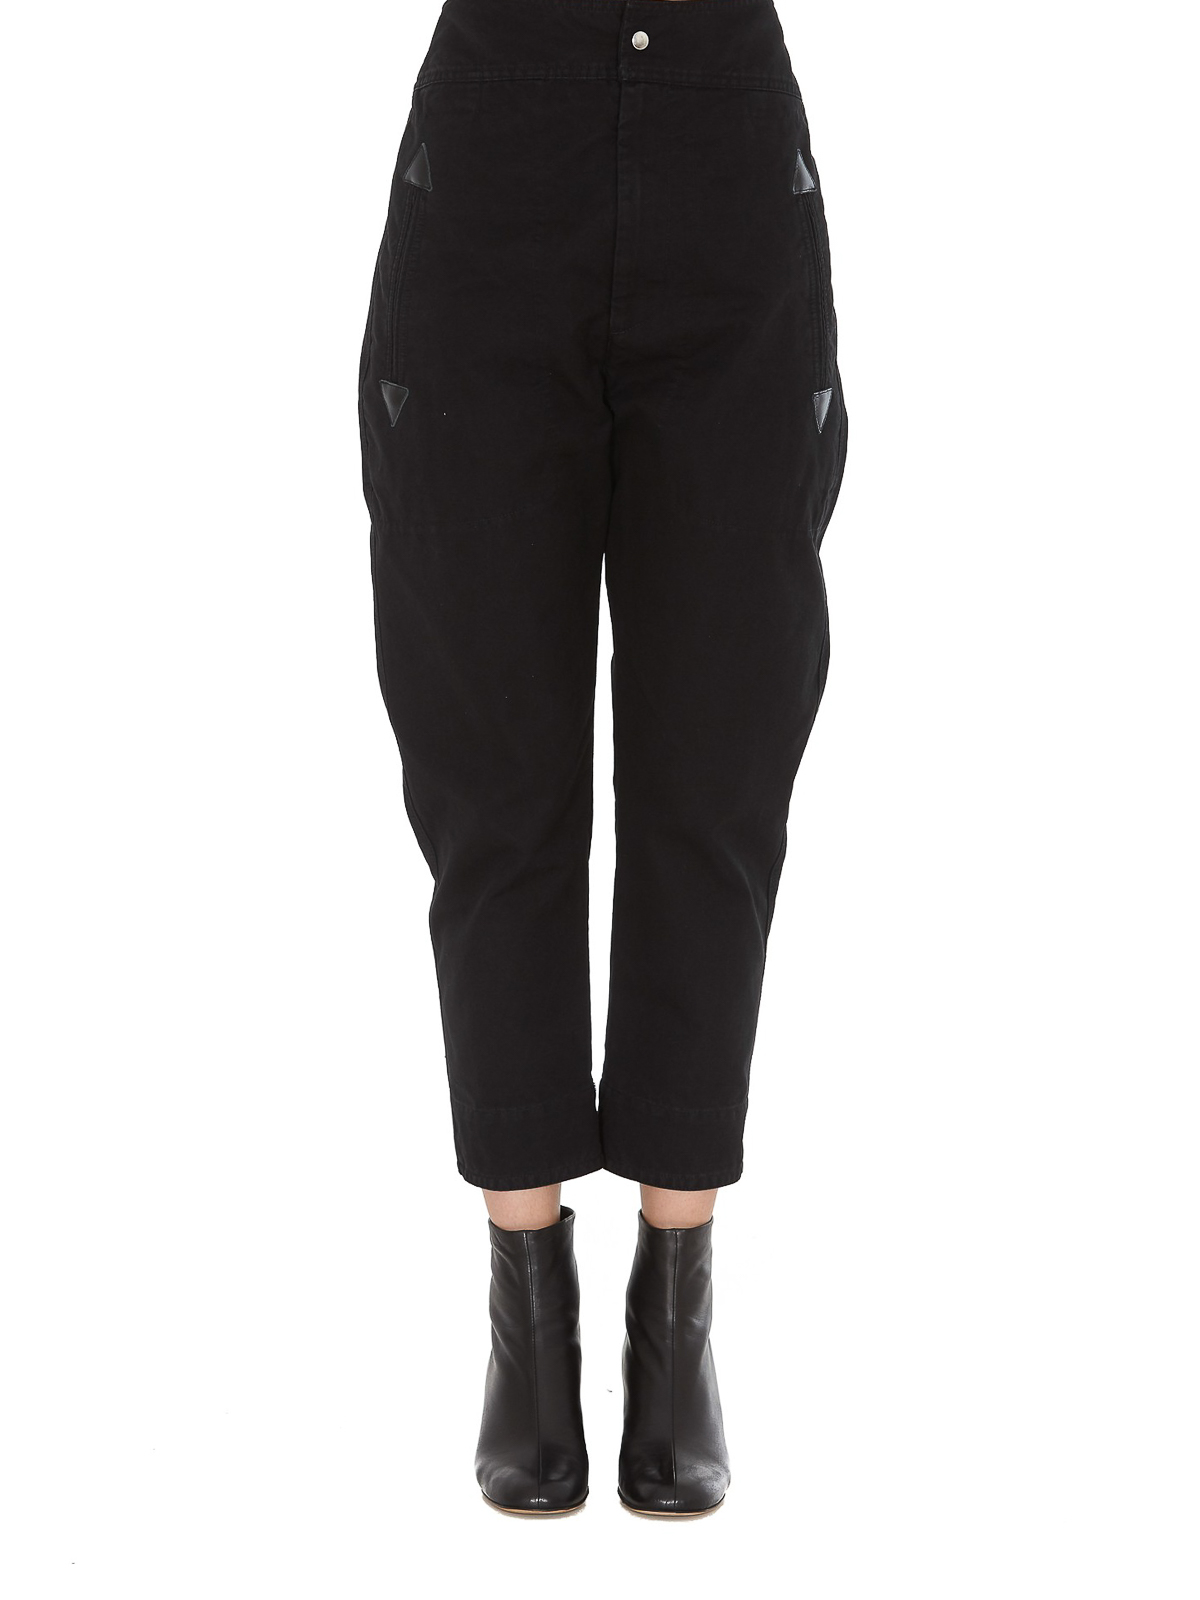 Buy Exclusive Isabel Marant Trousers  291 products  FASHIOLAin